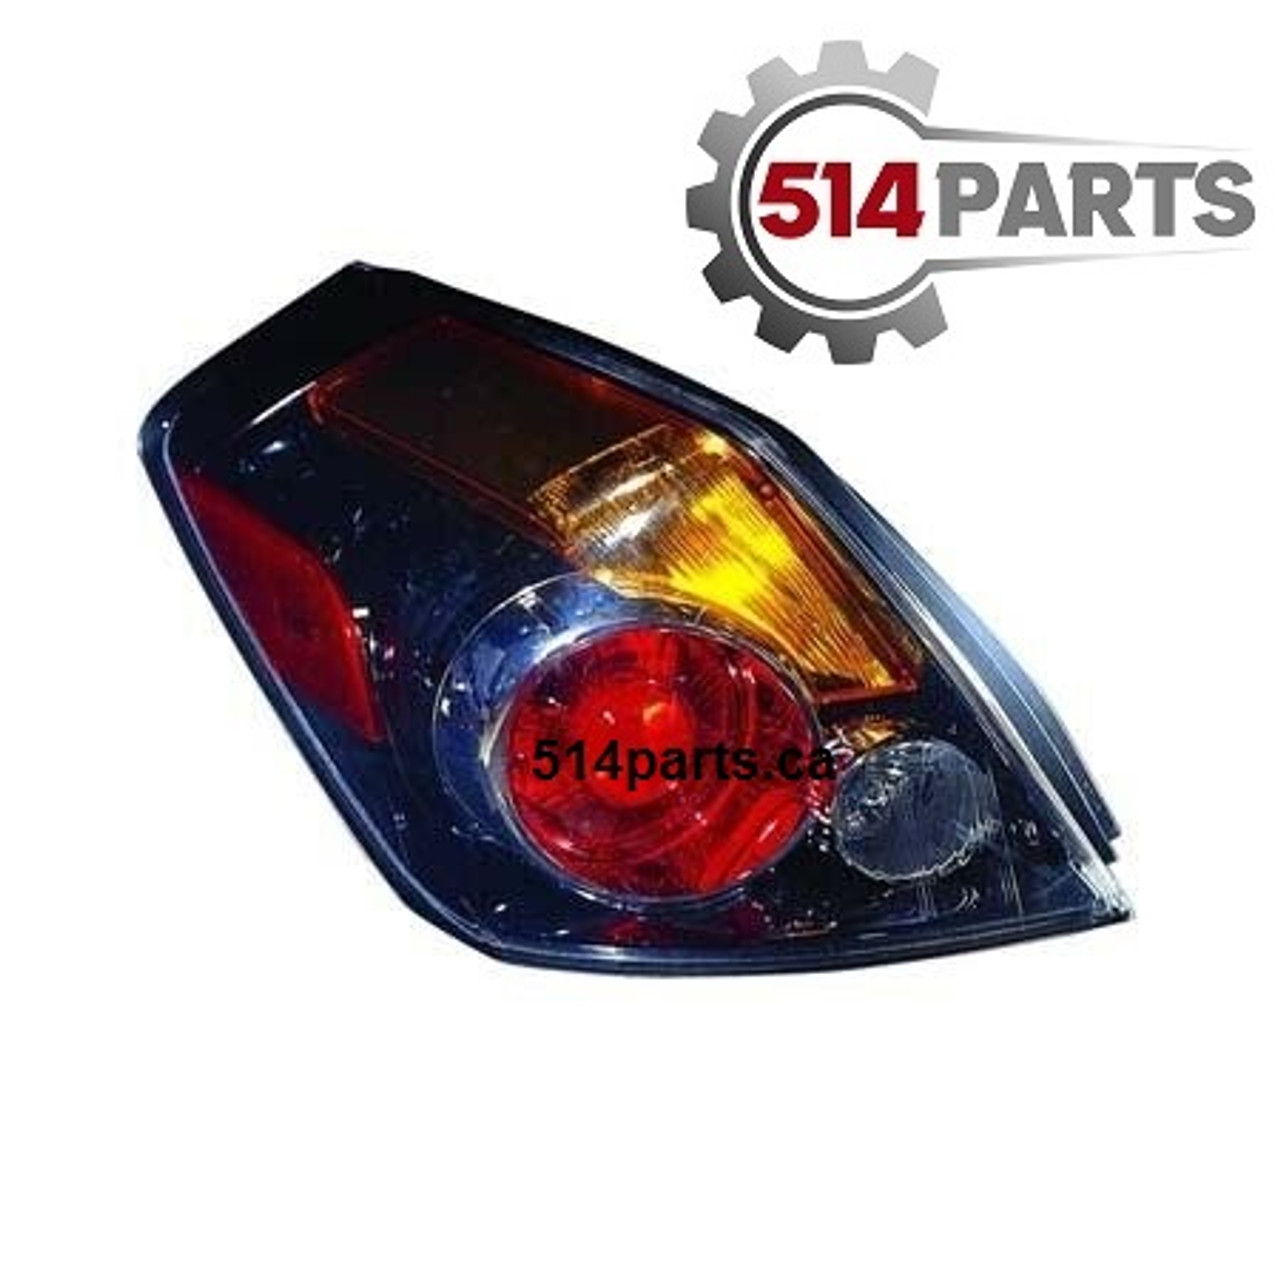 2007 - 2009 NISSAN ALTIMA and ALTIMA HYBRID TAIL LIGHTS High Quality - PHARES ARRIERE Haute Qualite